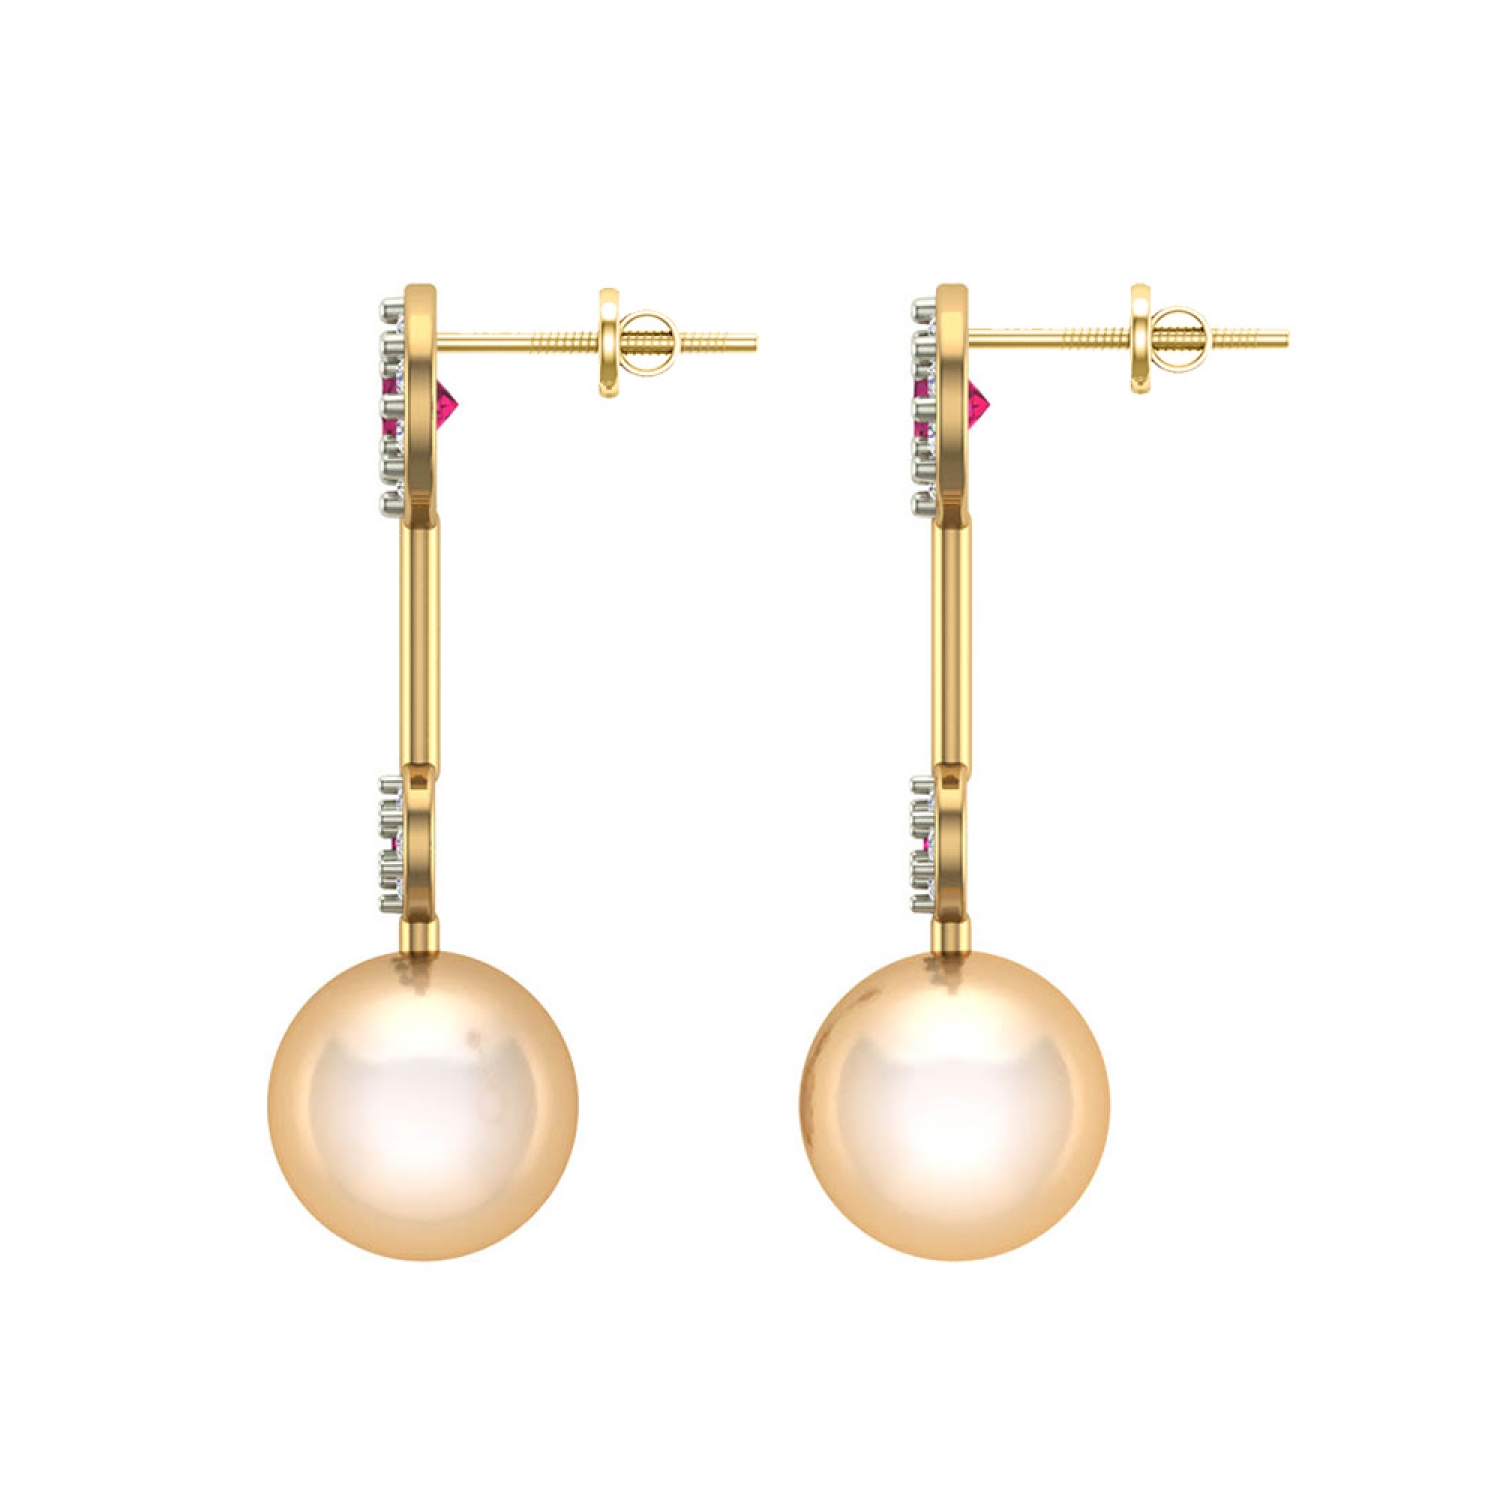 Share more than 228 white gold pearl earrings super hot